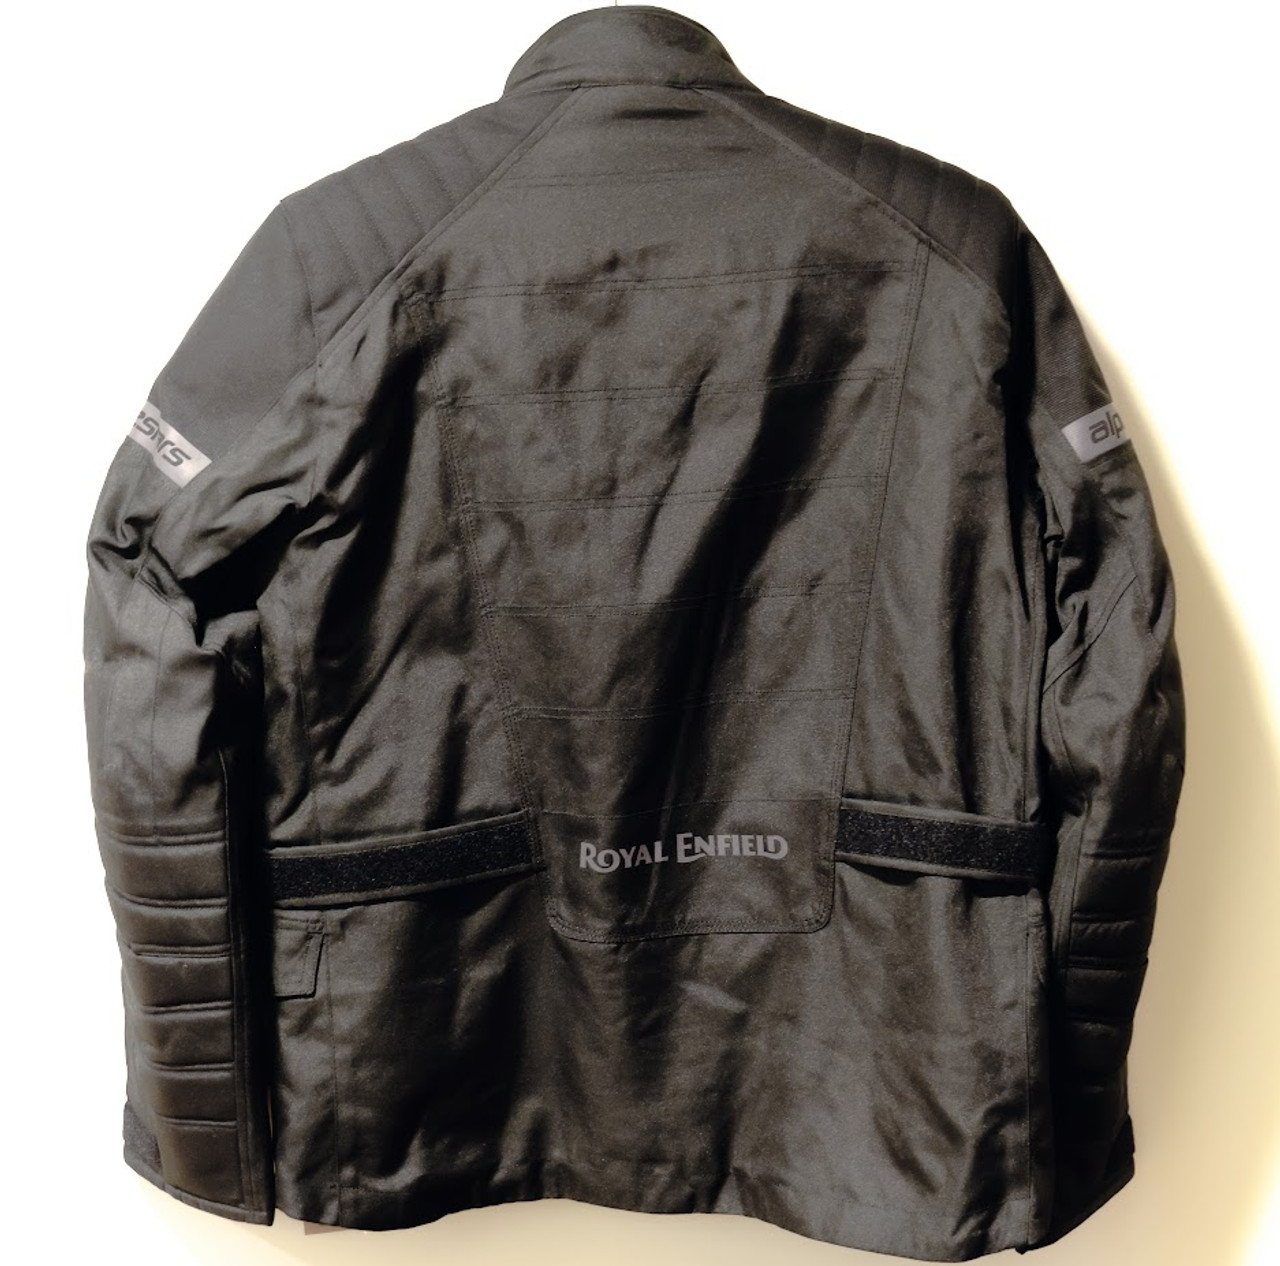 Royal Enfield launches New Line Of Riding Jackets - Bike India